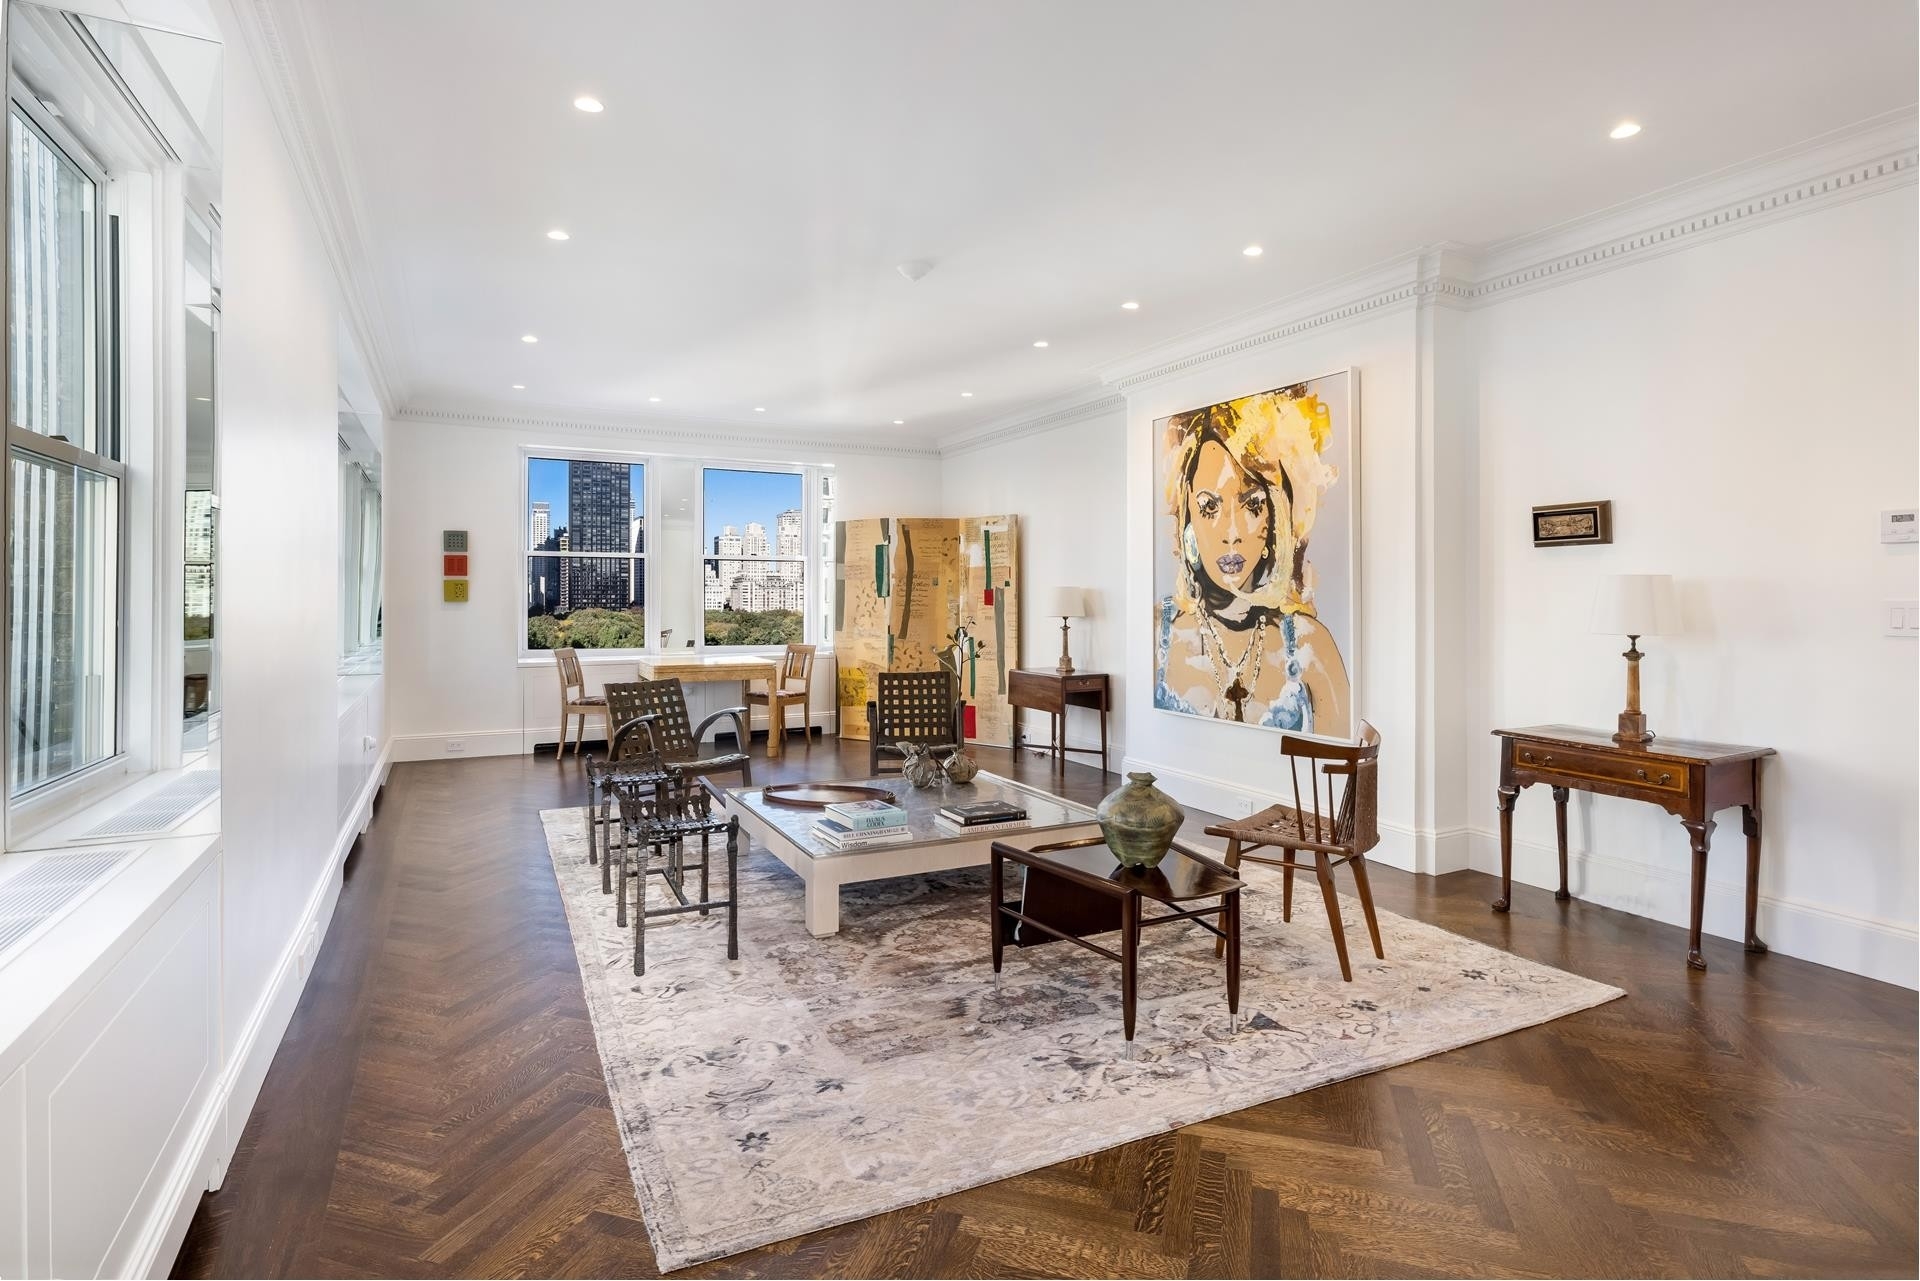 Co-op Properties for Sale at Sherry Netherland, 781 FIFTH AVE, 1205 Lenox Hill, New York, New York 10022